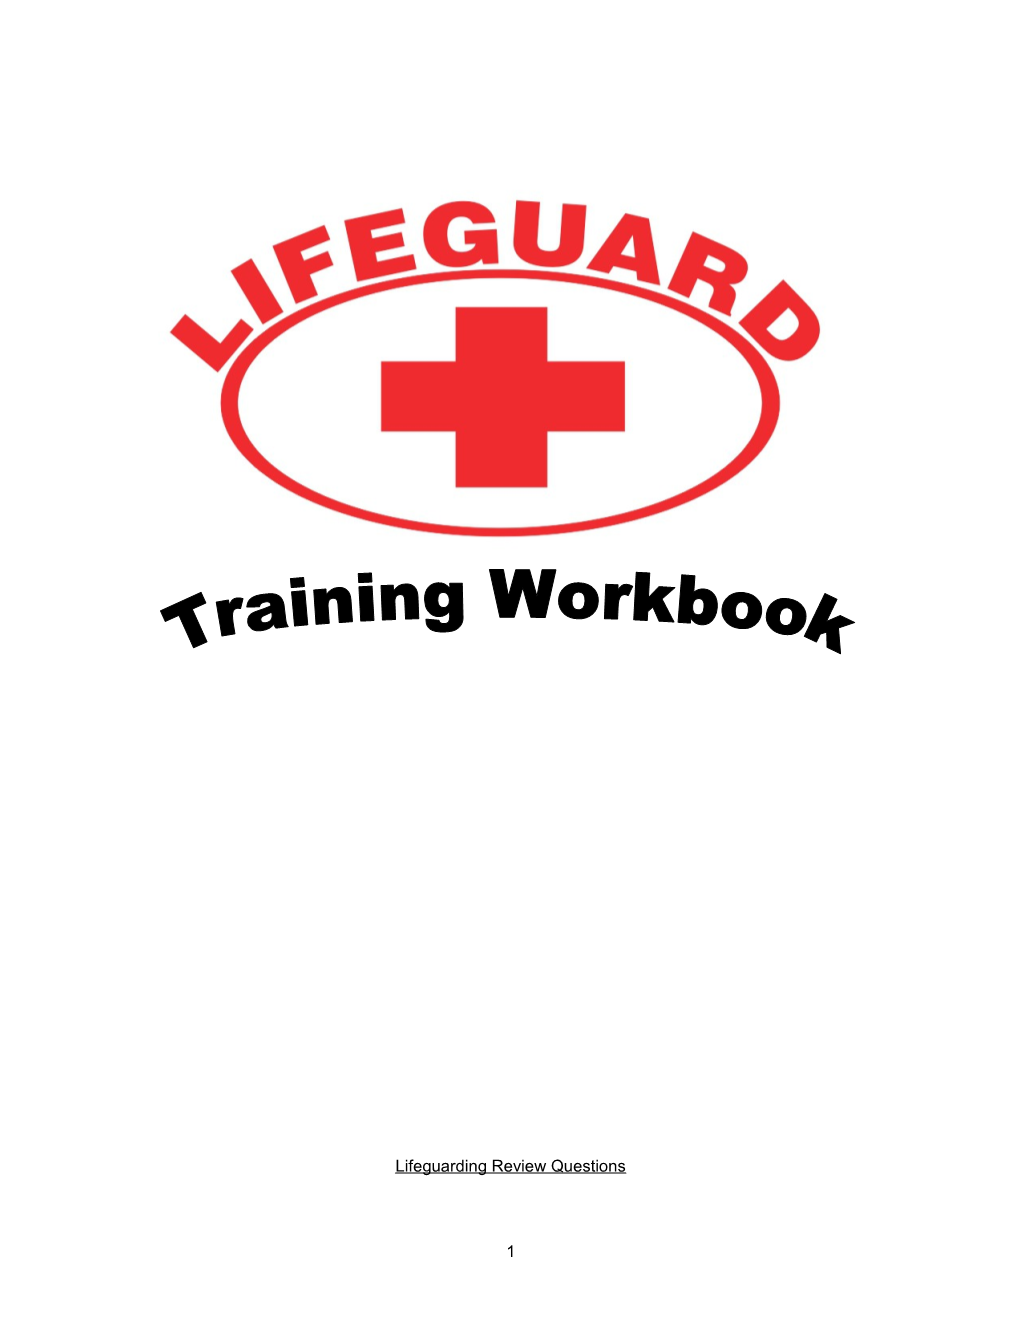 The Review Questions Are an Additional Resource for Lifeguarding Instructors